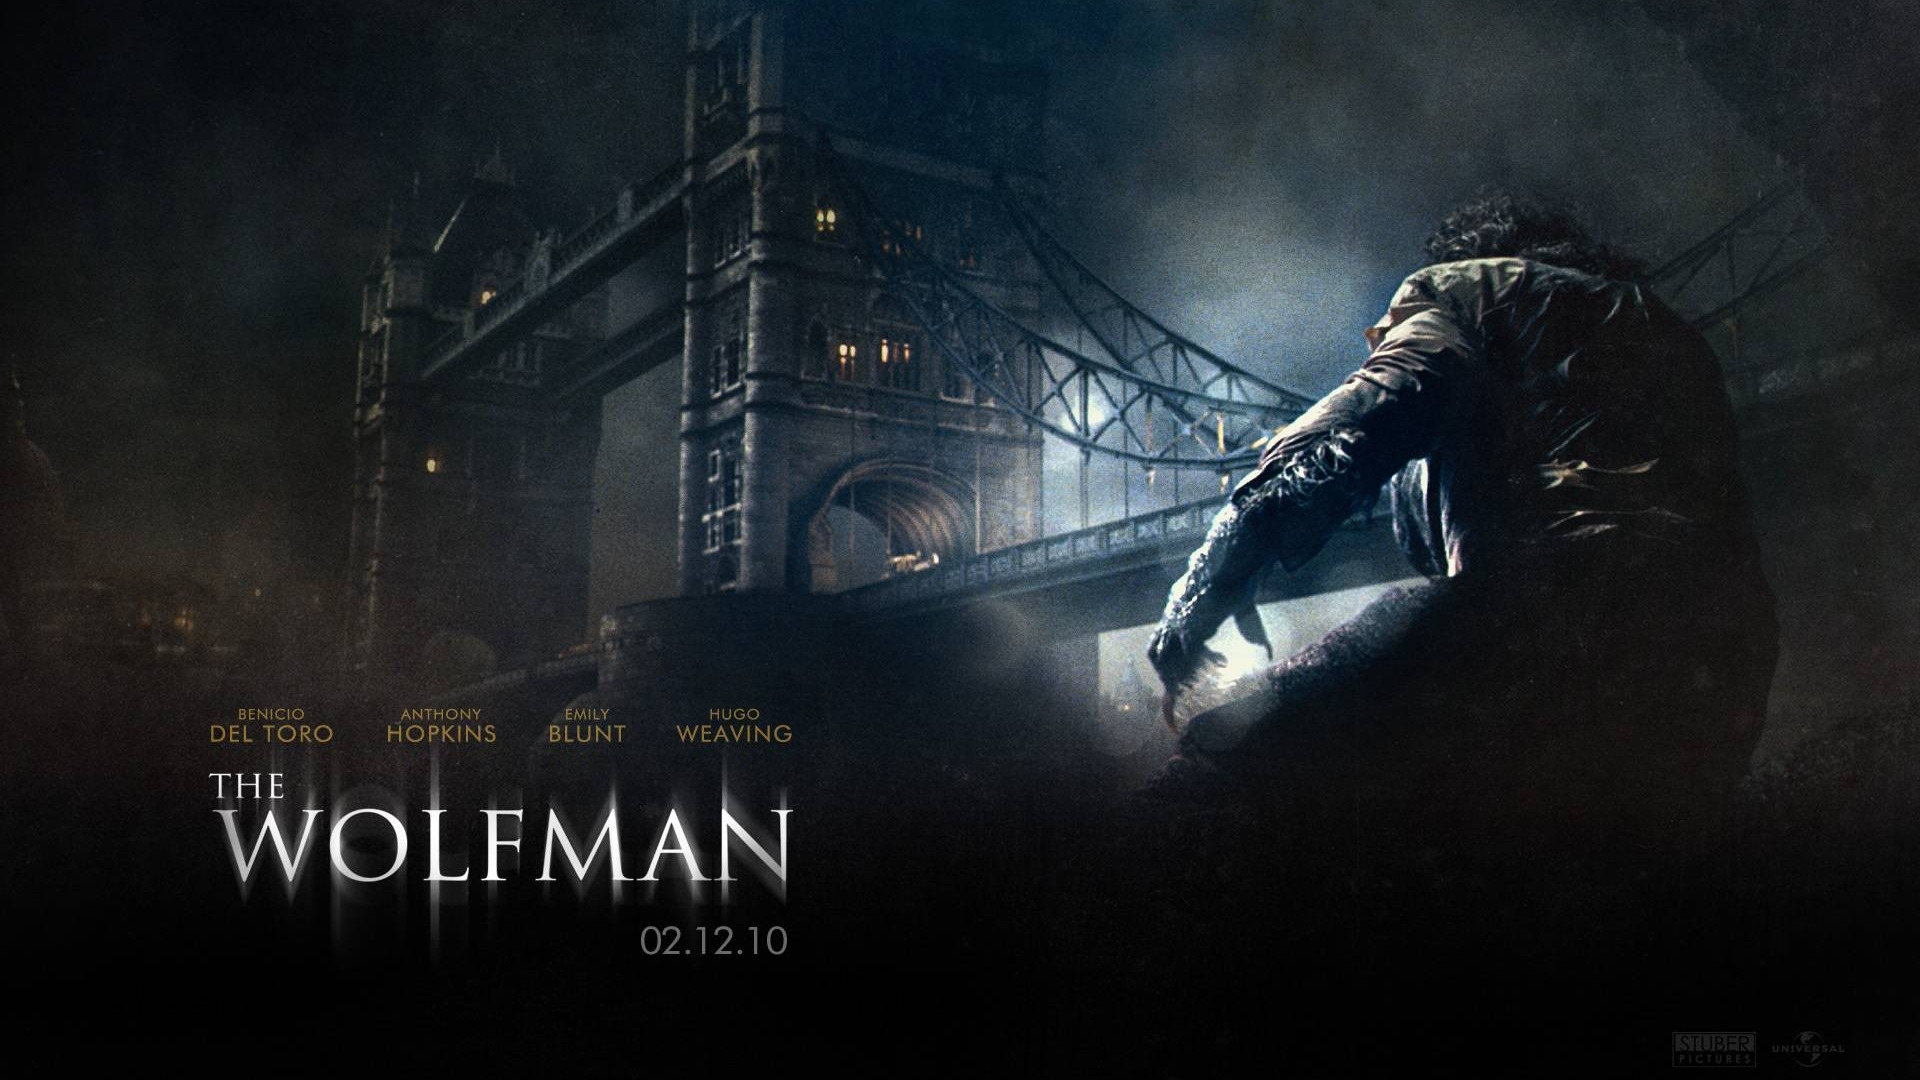 The Wolfman Movie Wallpapers #5 - 1920x1080